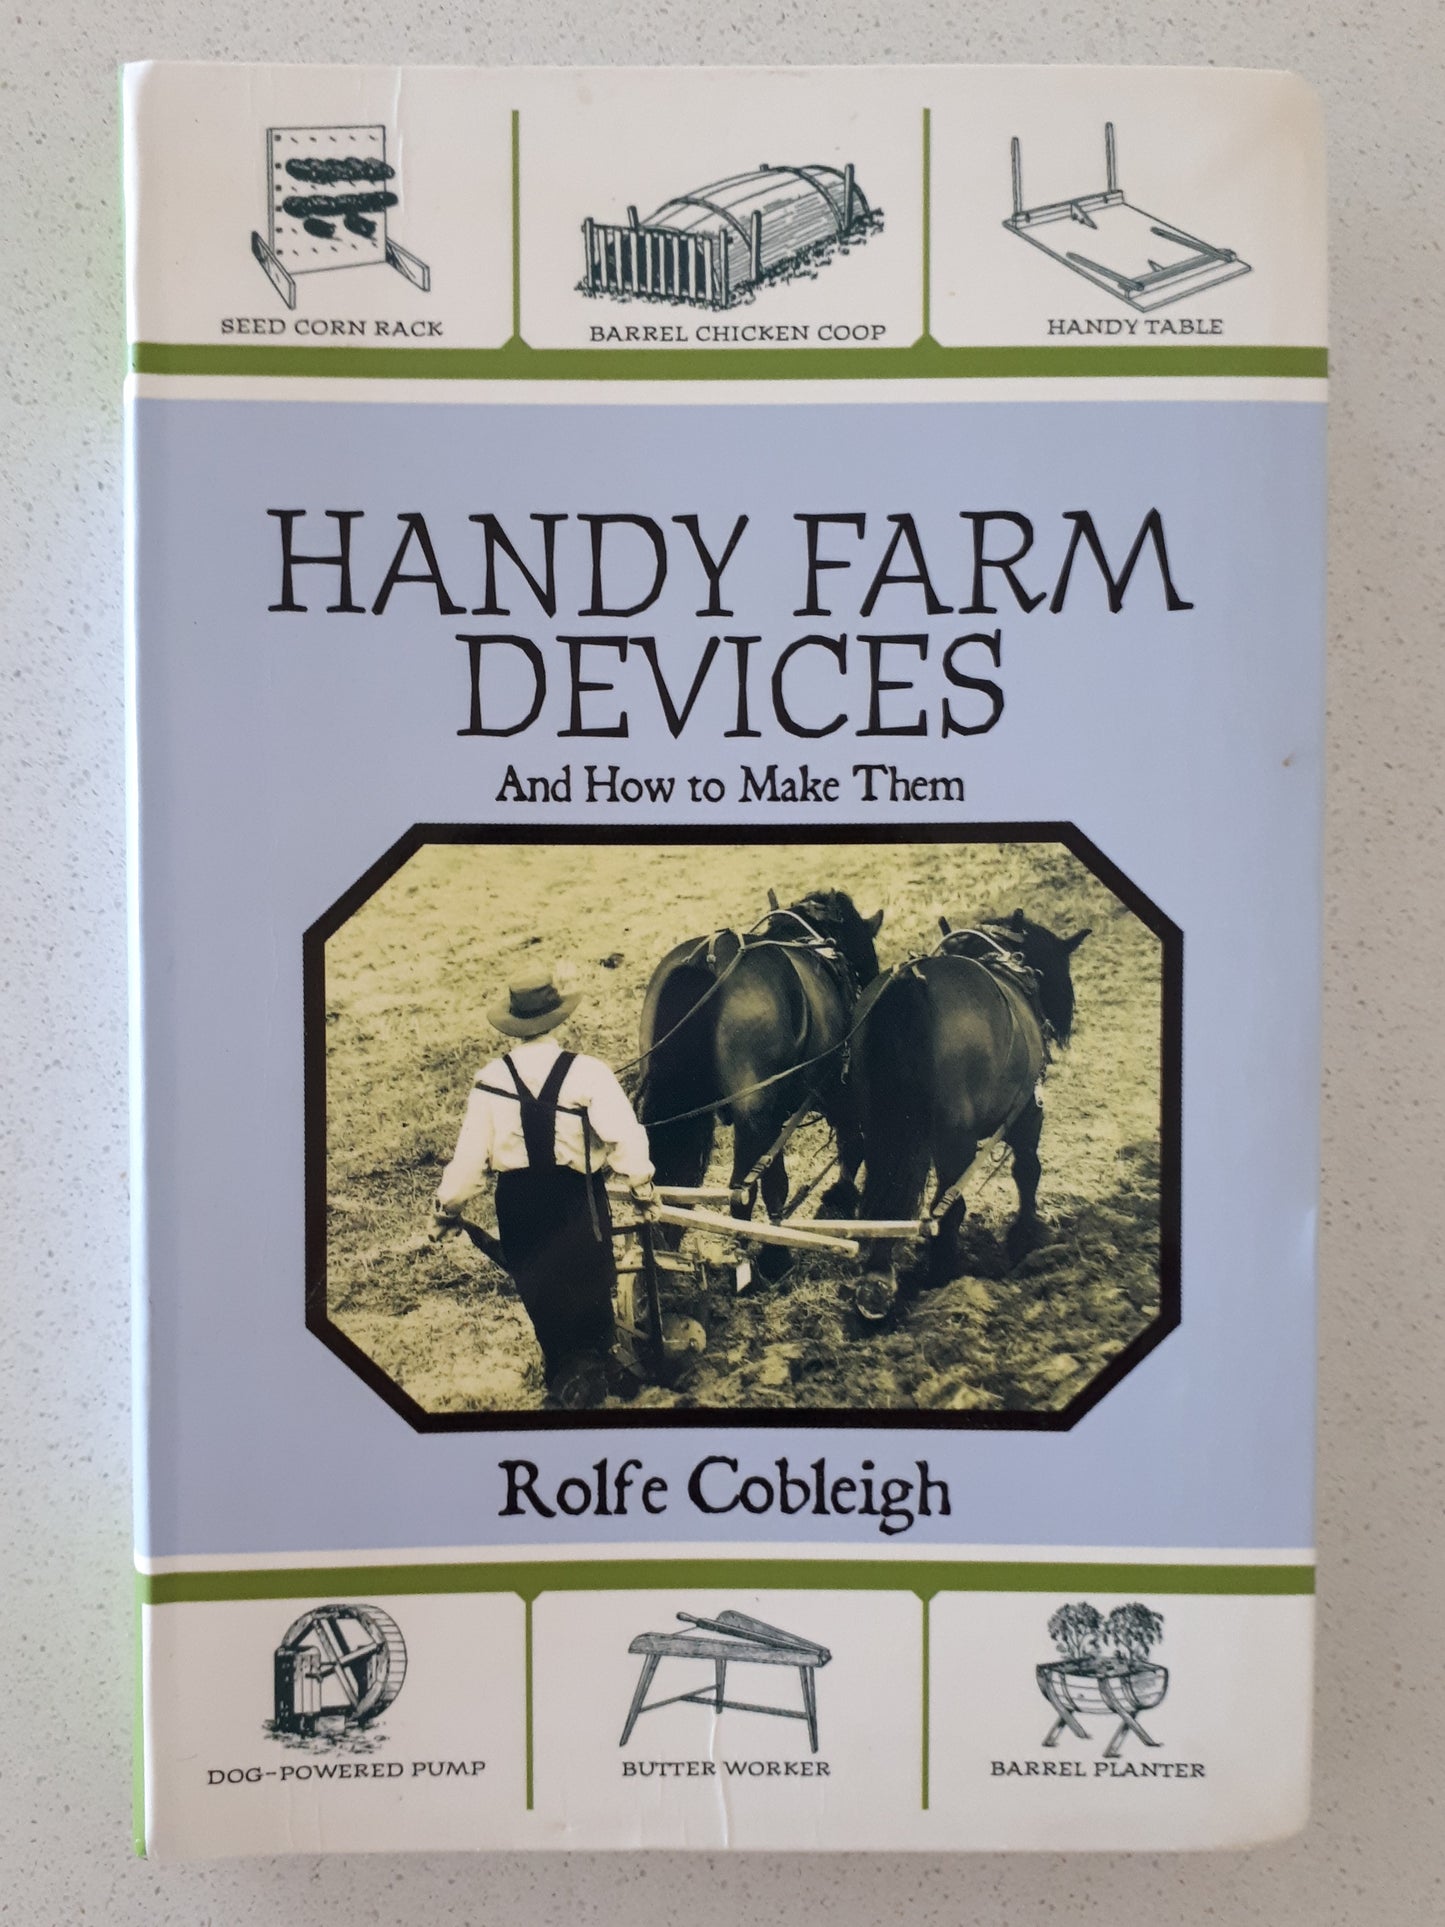 Handy Farm Devices And How To Make Them by Rolfe Cobleigh